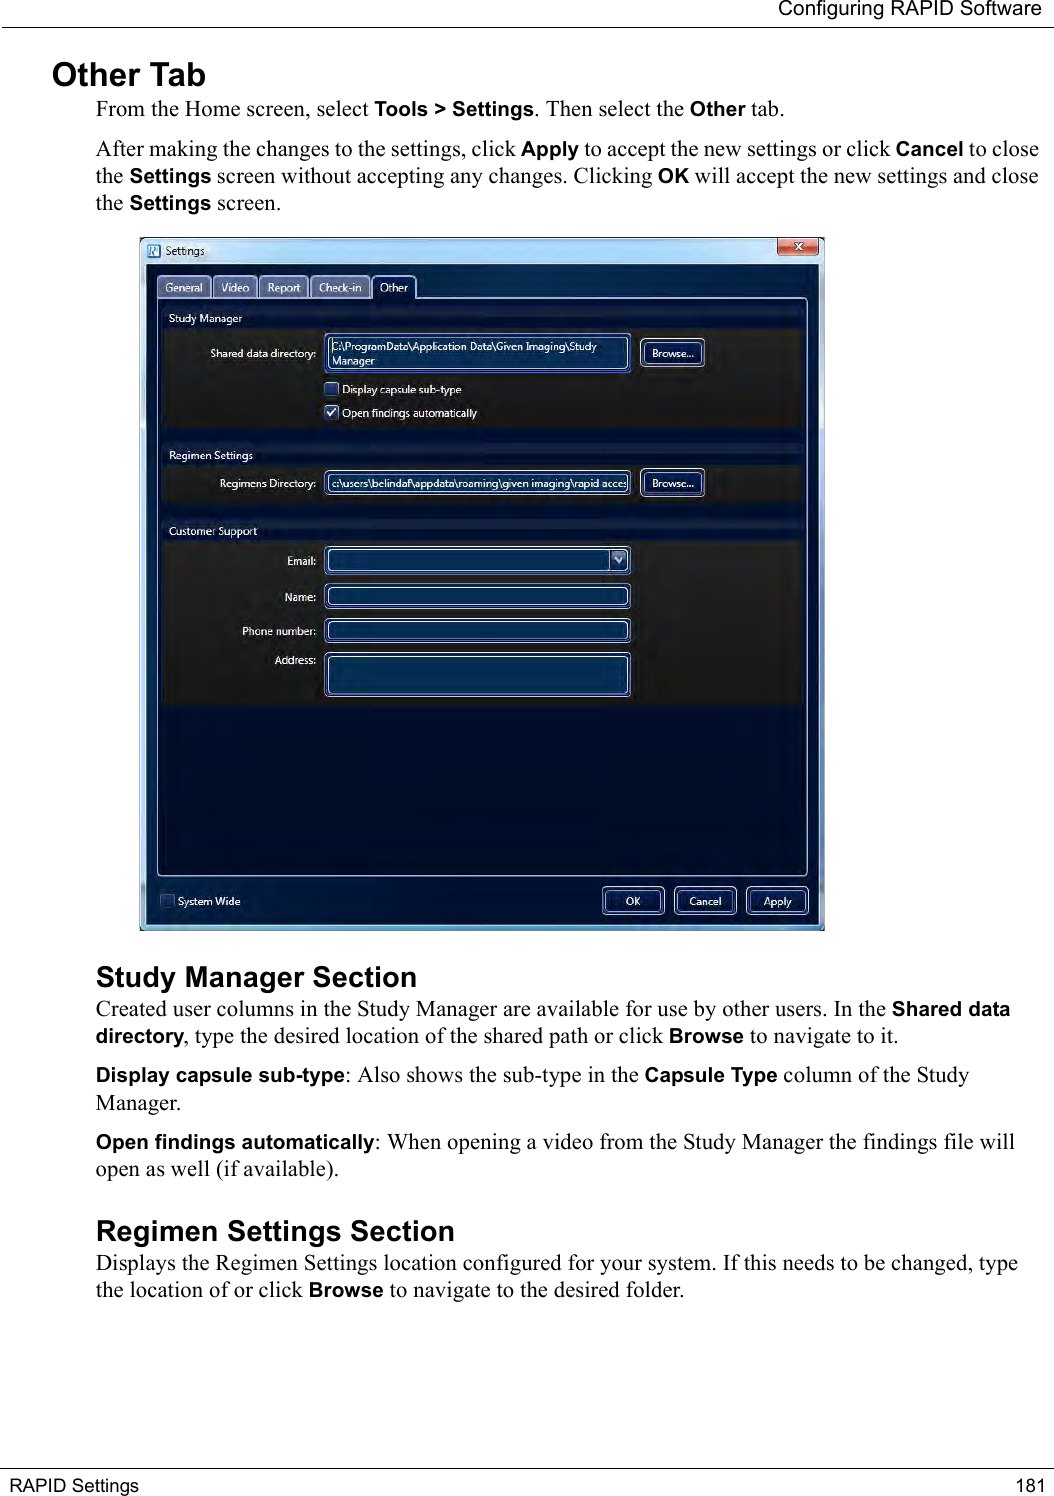 Configuring RAPID SoftwareRAPID Settings 181Other TabFrom the Home screen, select Tools &gt; Settings. Then select the Other tab.After making the changes to the settings, click Apply to accept the new settings or click Cancel to close the Settings screen without accepting any changes. Clicking OK will accept the new settings and close the Settings screen. Study Manager SectionCreated user columns in the Study Manager are available for use by other users. In the Shared data directory, type the desired location of the shared path or click Browse to navigate to it.Display capsule sub-type: Also shows the sub-type in the Capsule Type column of the Study Manager.Open findings automatically: When opening a video from the Study Manager the findings file will open as well (if available).Regimen Settings SectionDisplays the Regimen Settings location configured for your system. If this needs to be changed, type the location of or click Browse to navigate to the desired folder.